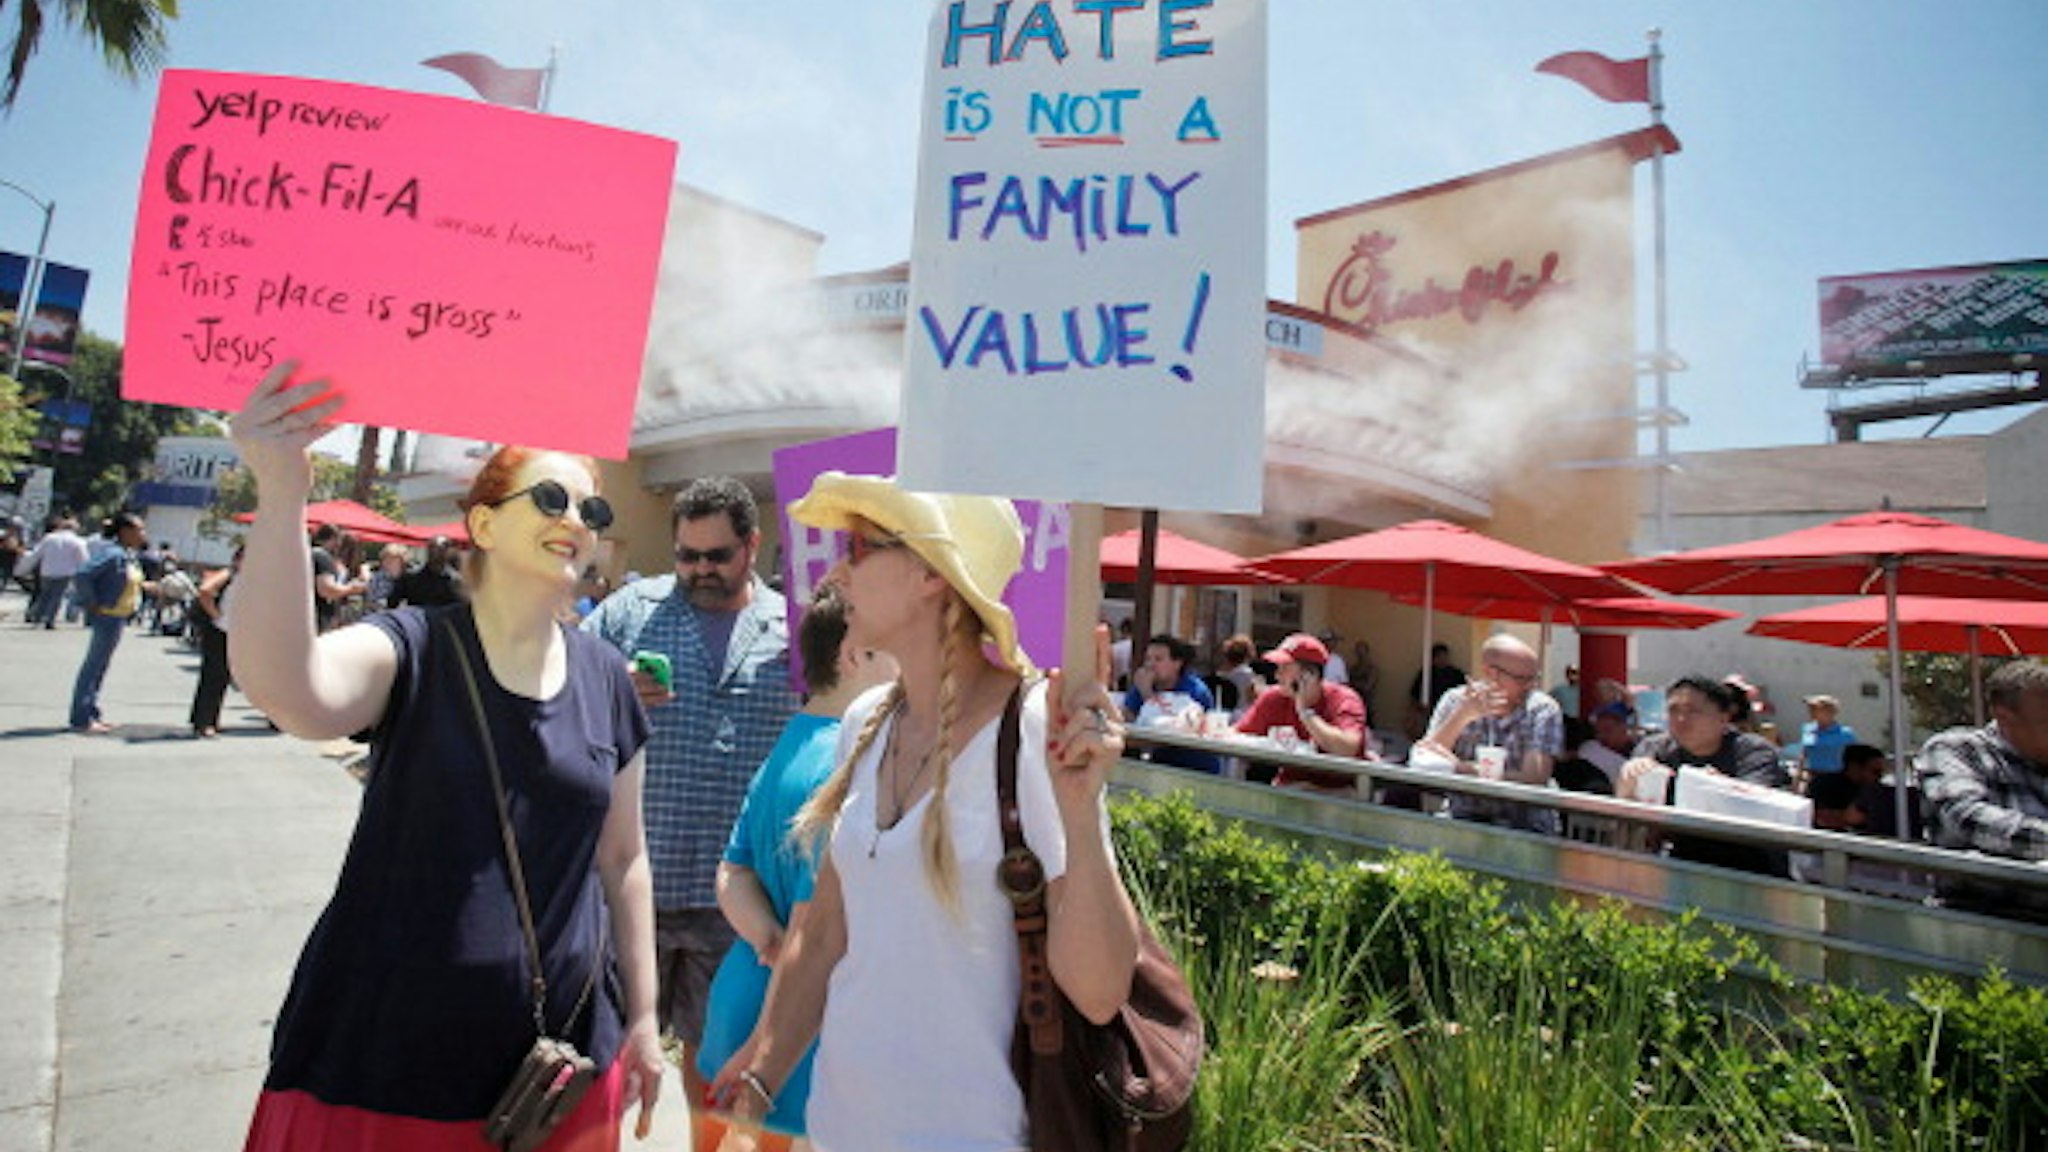 HOLLYWOOD, CA - AUGUST 01: (L-R) Jane Wilson and actress Kris McGaha attend the 'Chick-Fil-A Is Anti-Gay!' PETA and LGBT community protest at Chick-fil-A on August 1, 2012 in Hollywood, California.